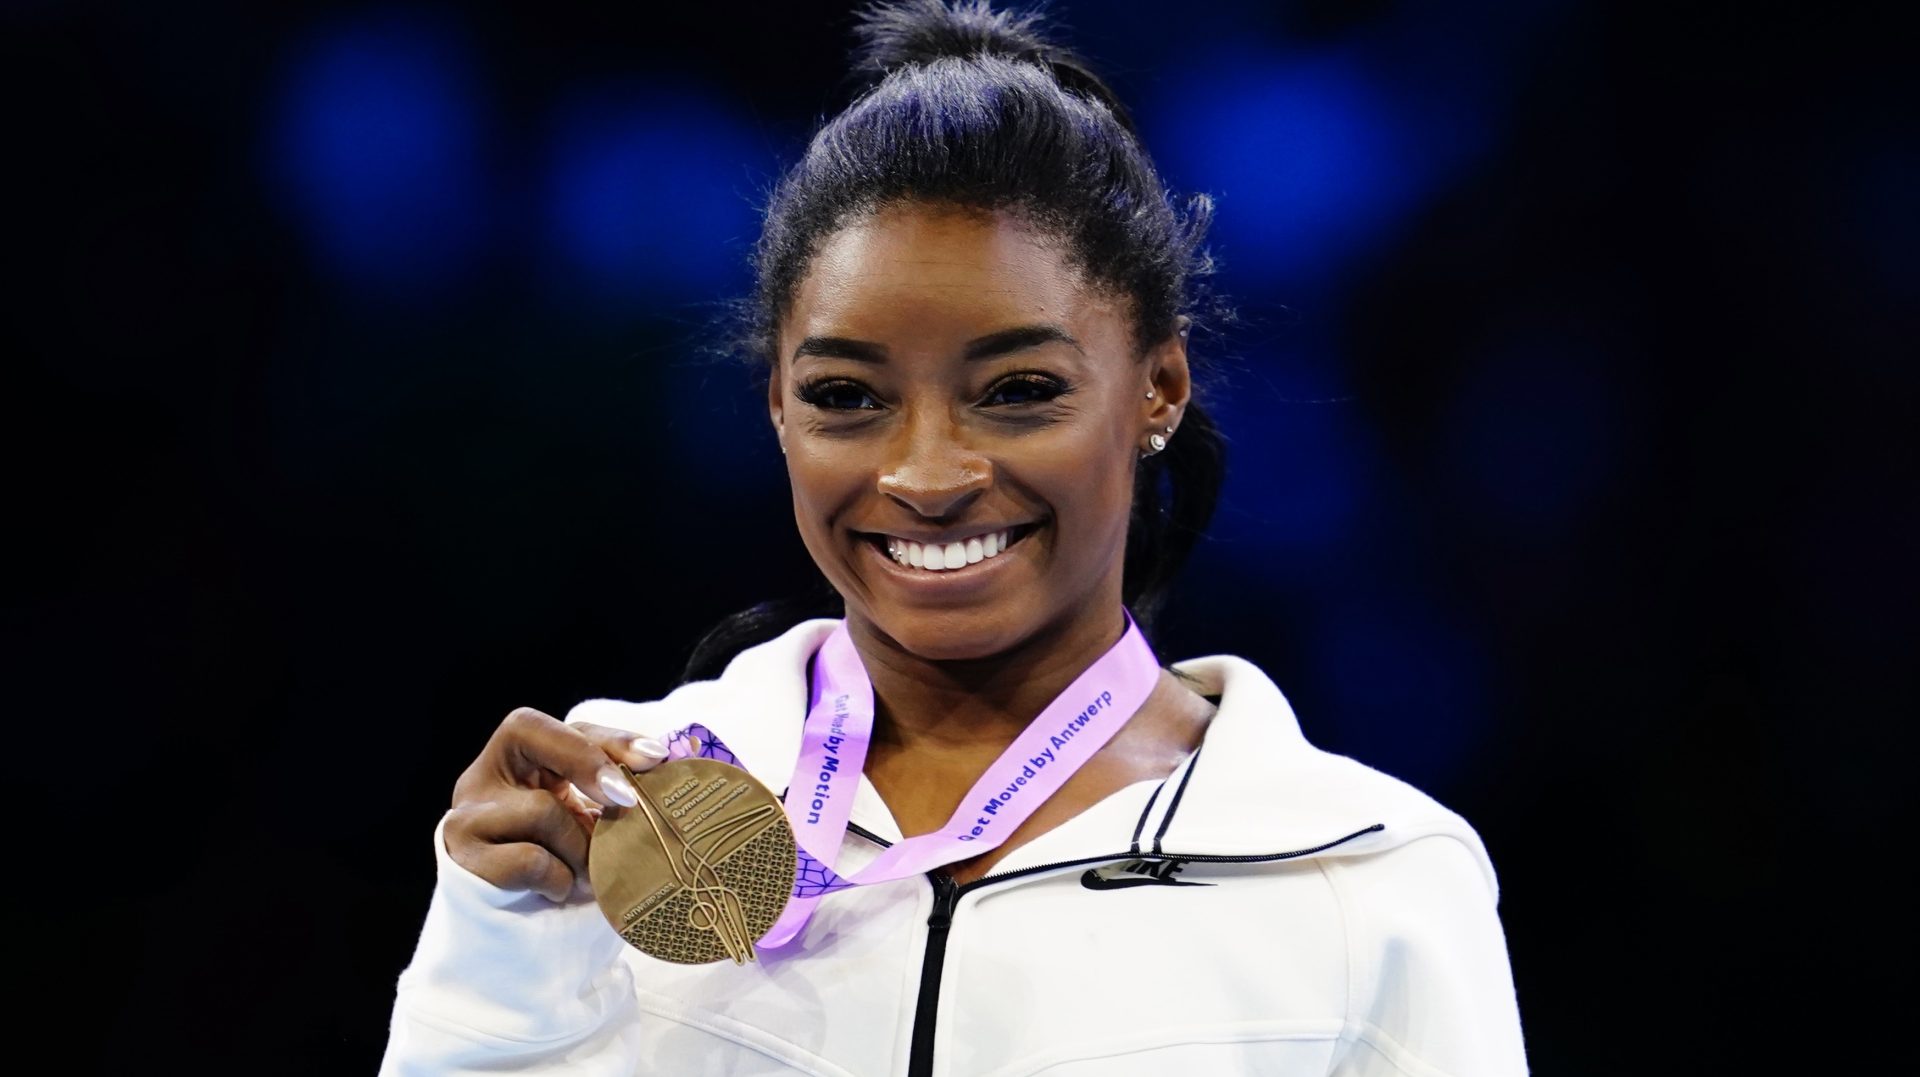 Officially The GOAT: Simone Biles Named Most Decorated Gymnast EVER!